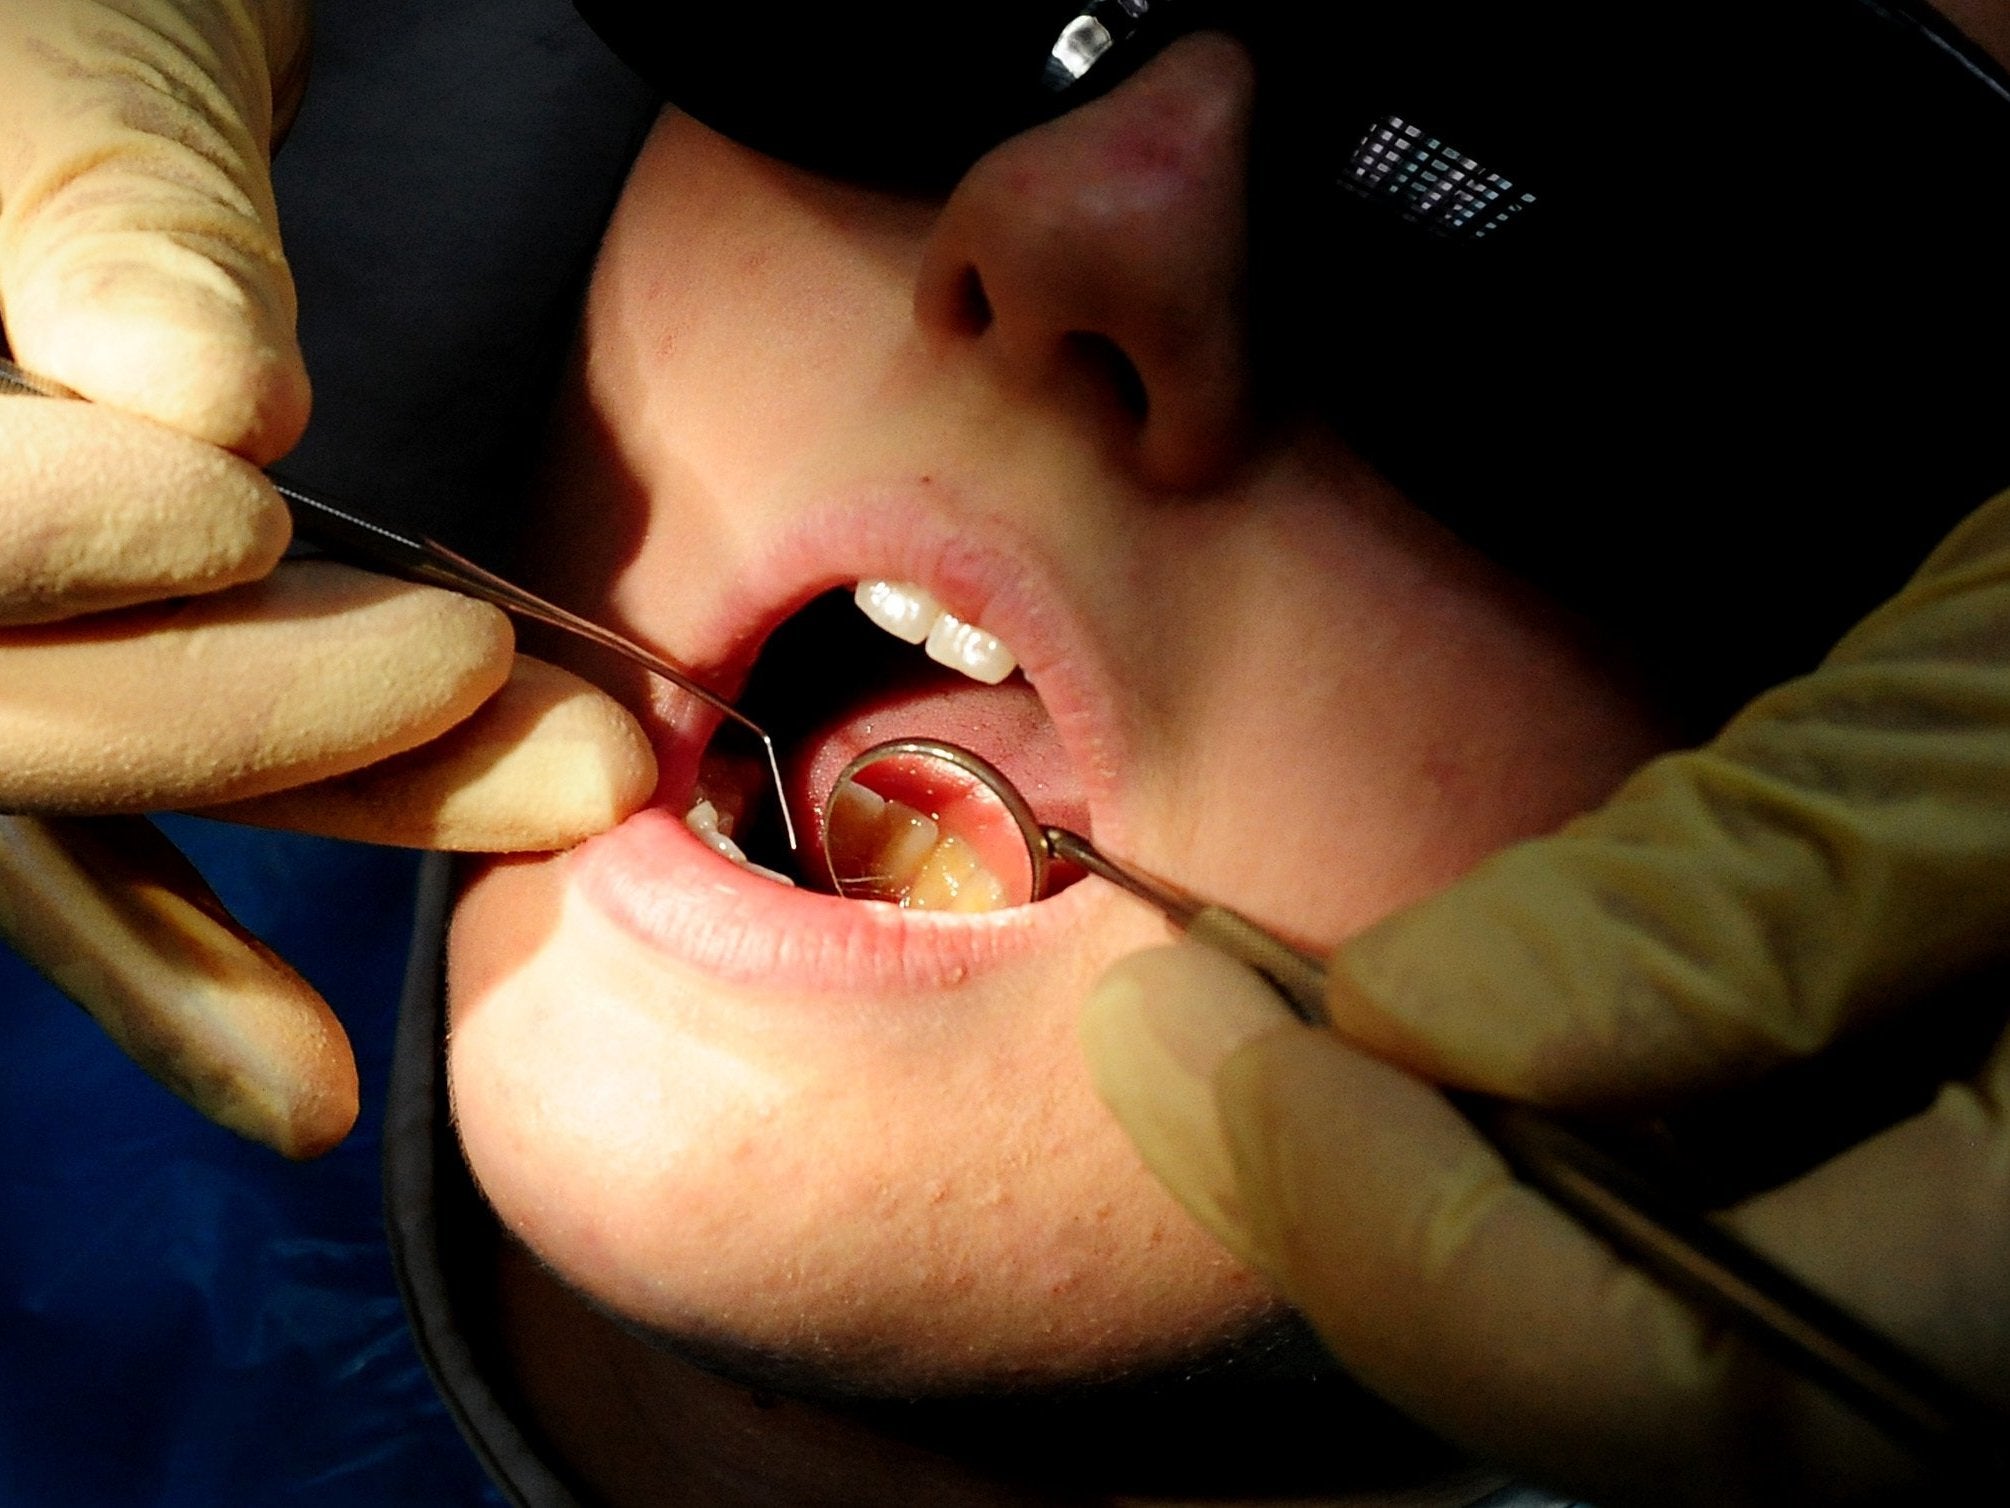 NHS dental prices have seen a 5 per cent increase in 2019, the latest of five annual price hikes